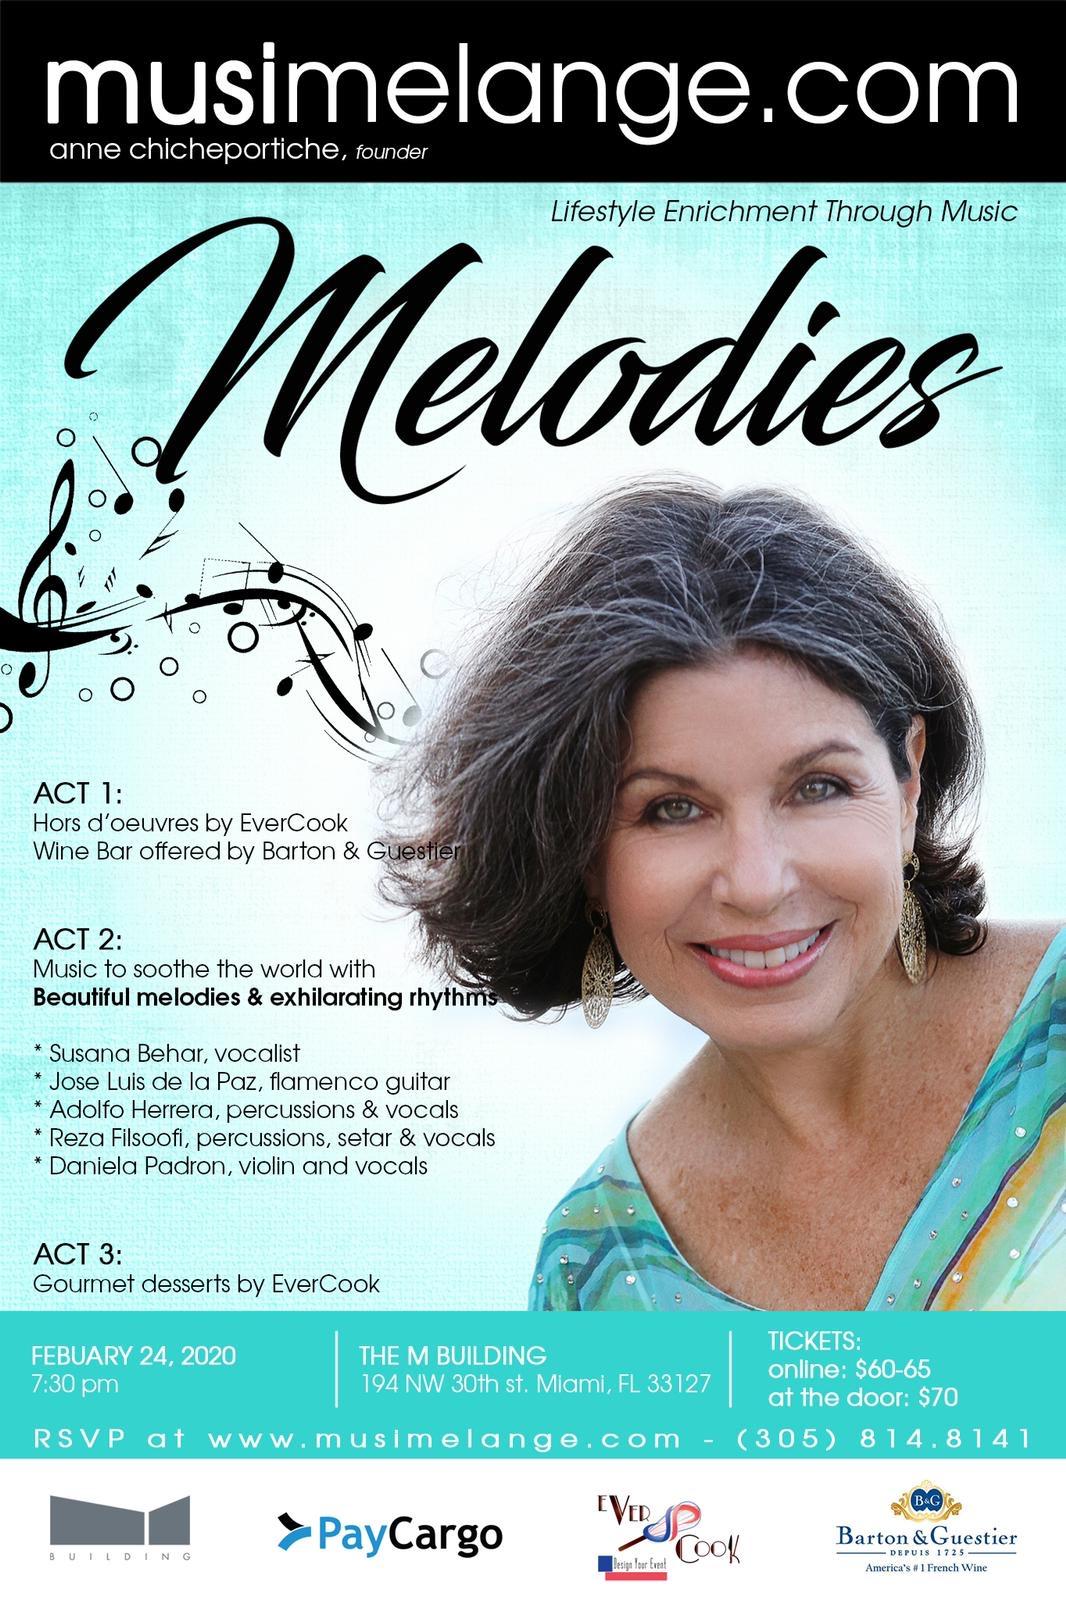 Melodies of the world - CHAMBER MUSIC CONCERT & GASTRONOMIC SERIES